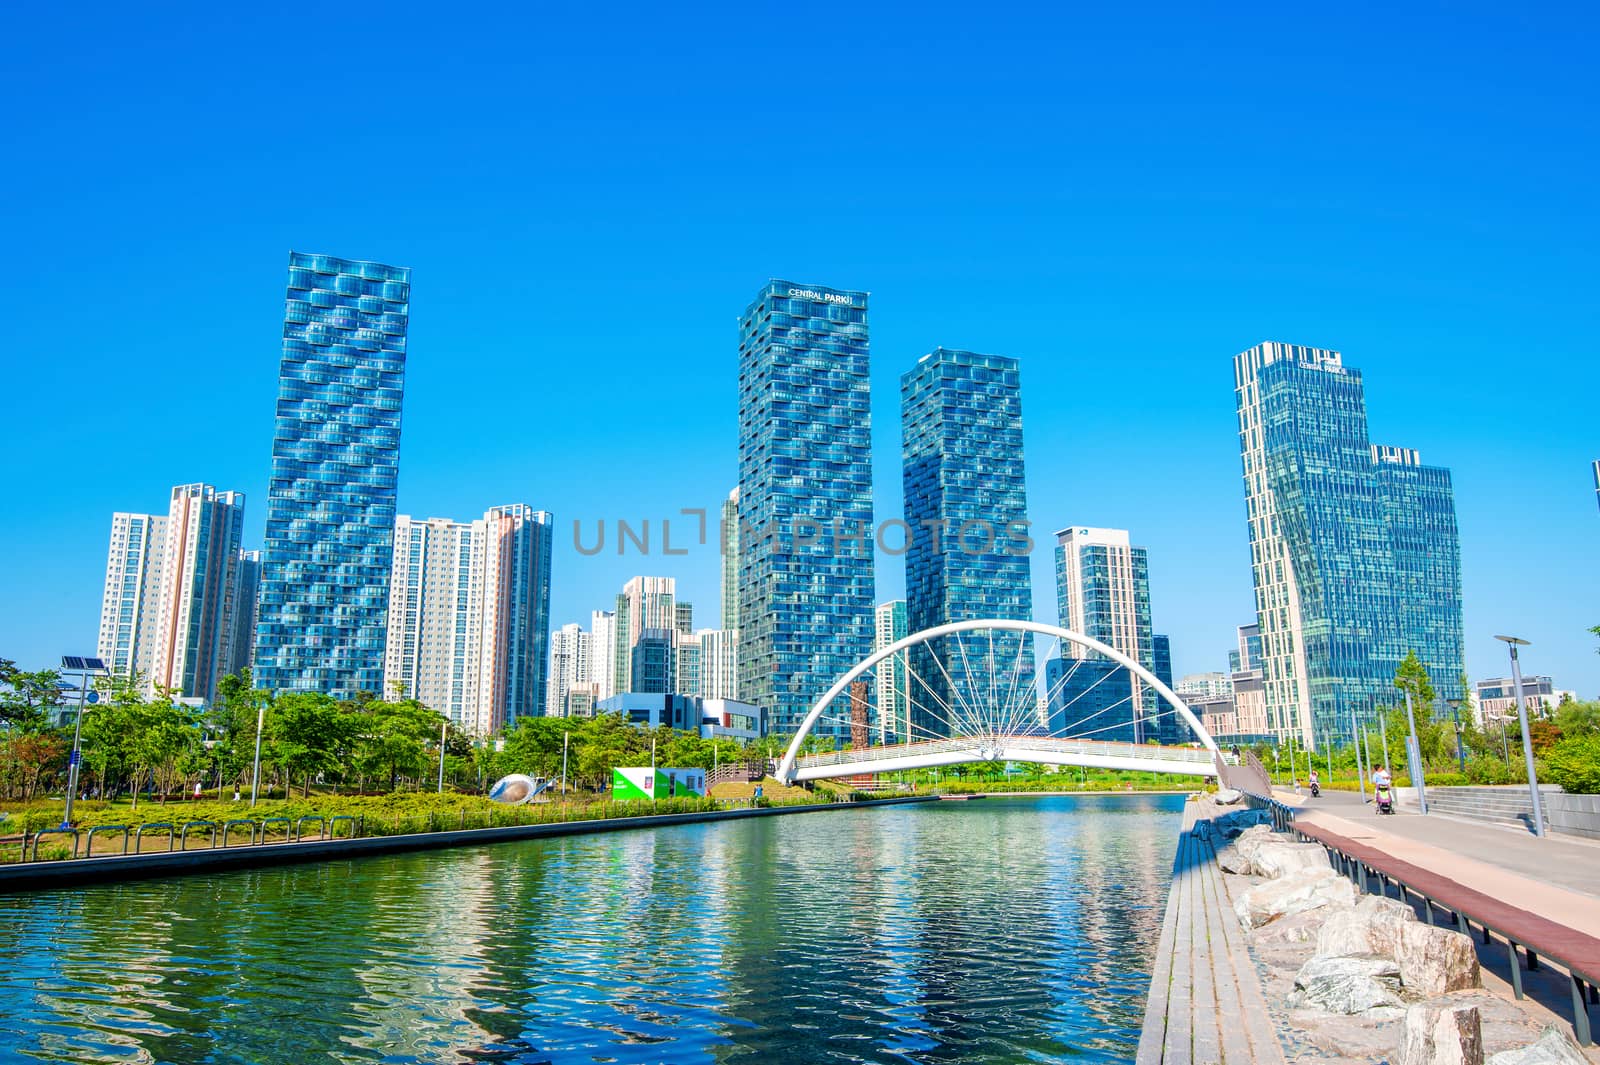 INCHEON, SOUTH KOREA - MAY 20 : Songdo Central Park is the green space plan,inspired by NYC. Photo taken May 20,2015 in Incheon, South Korea.